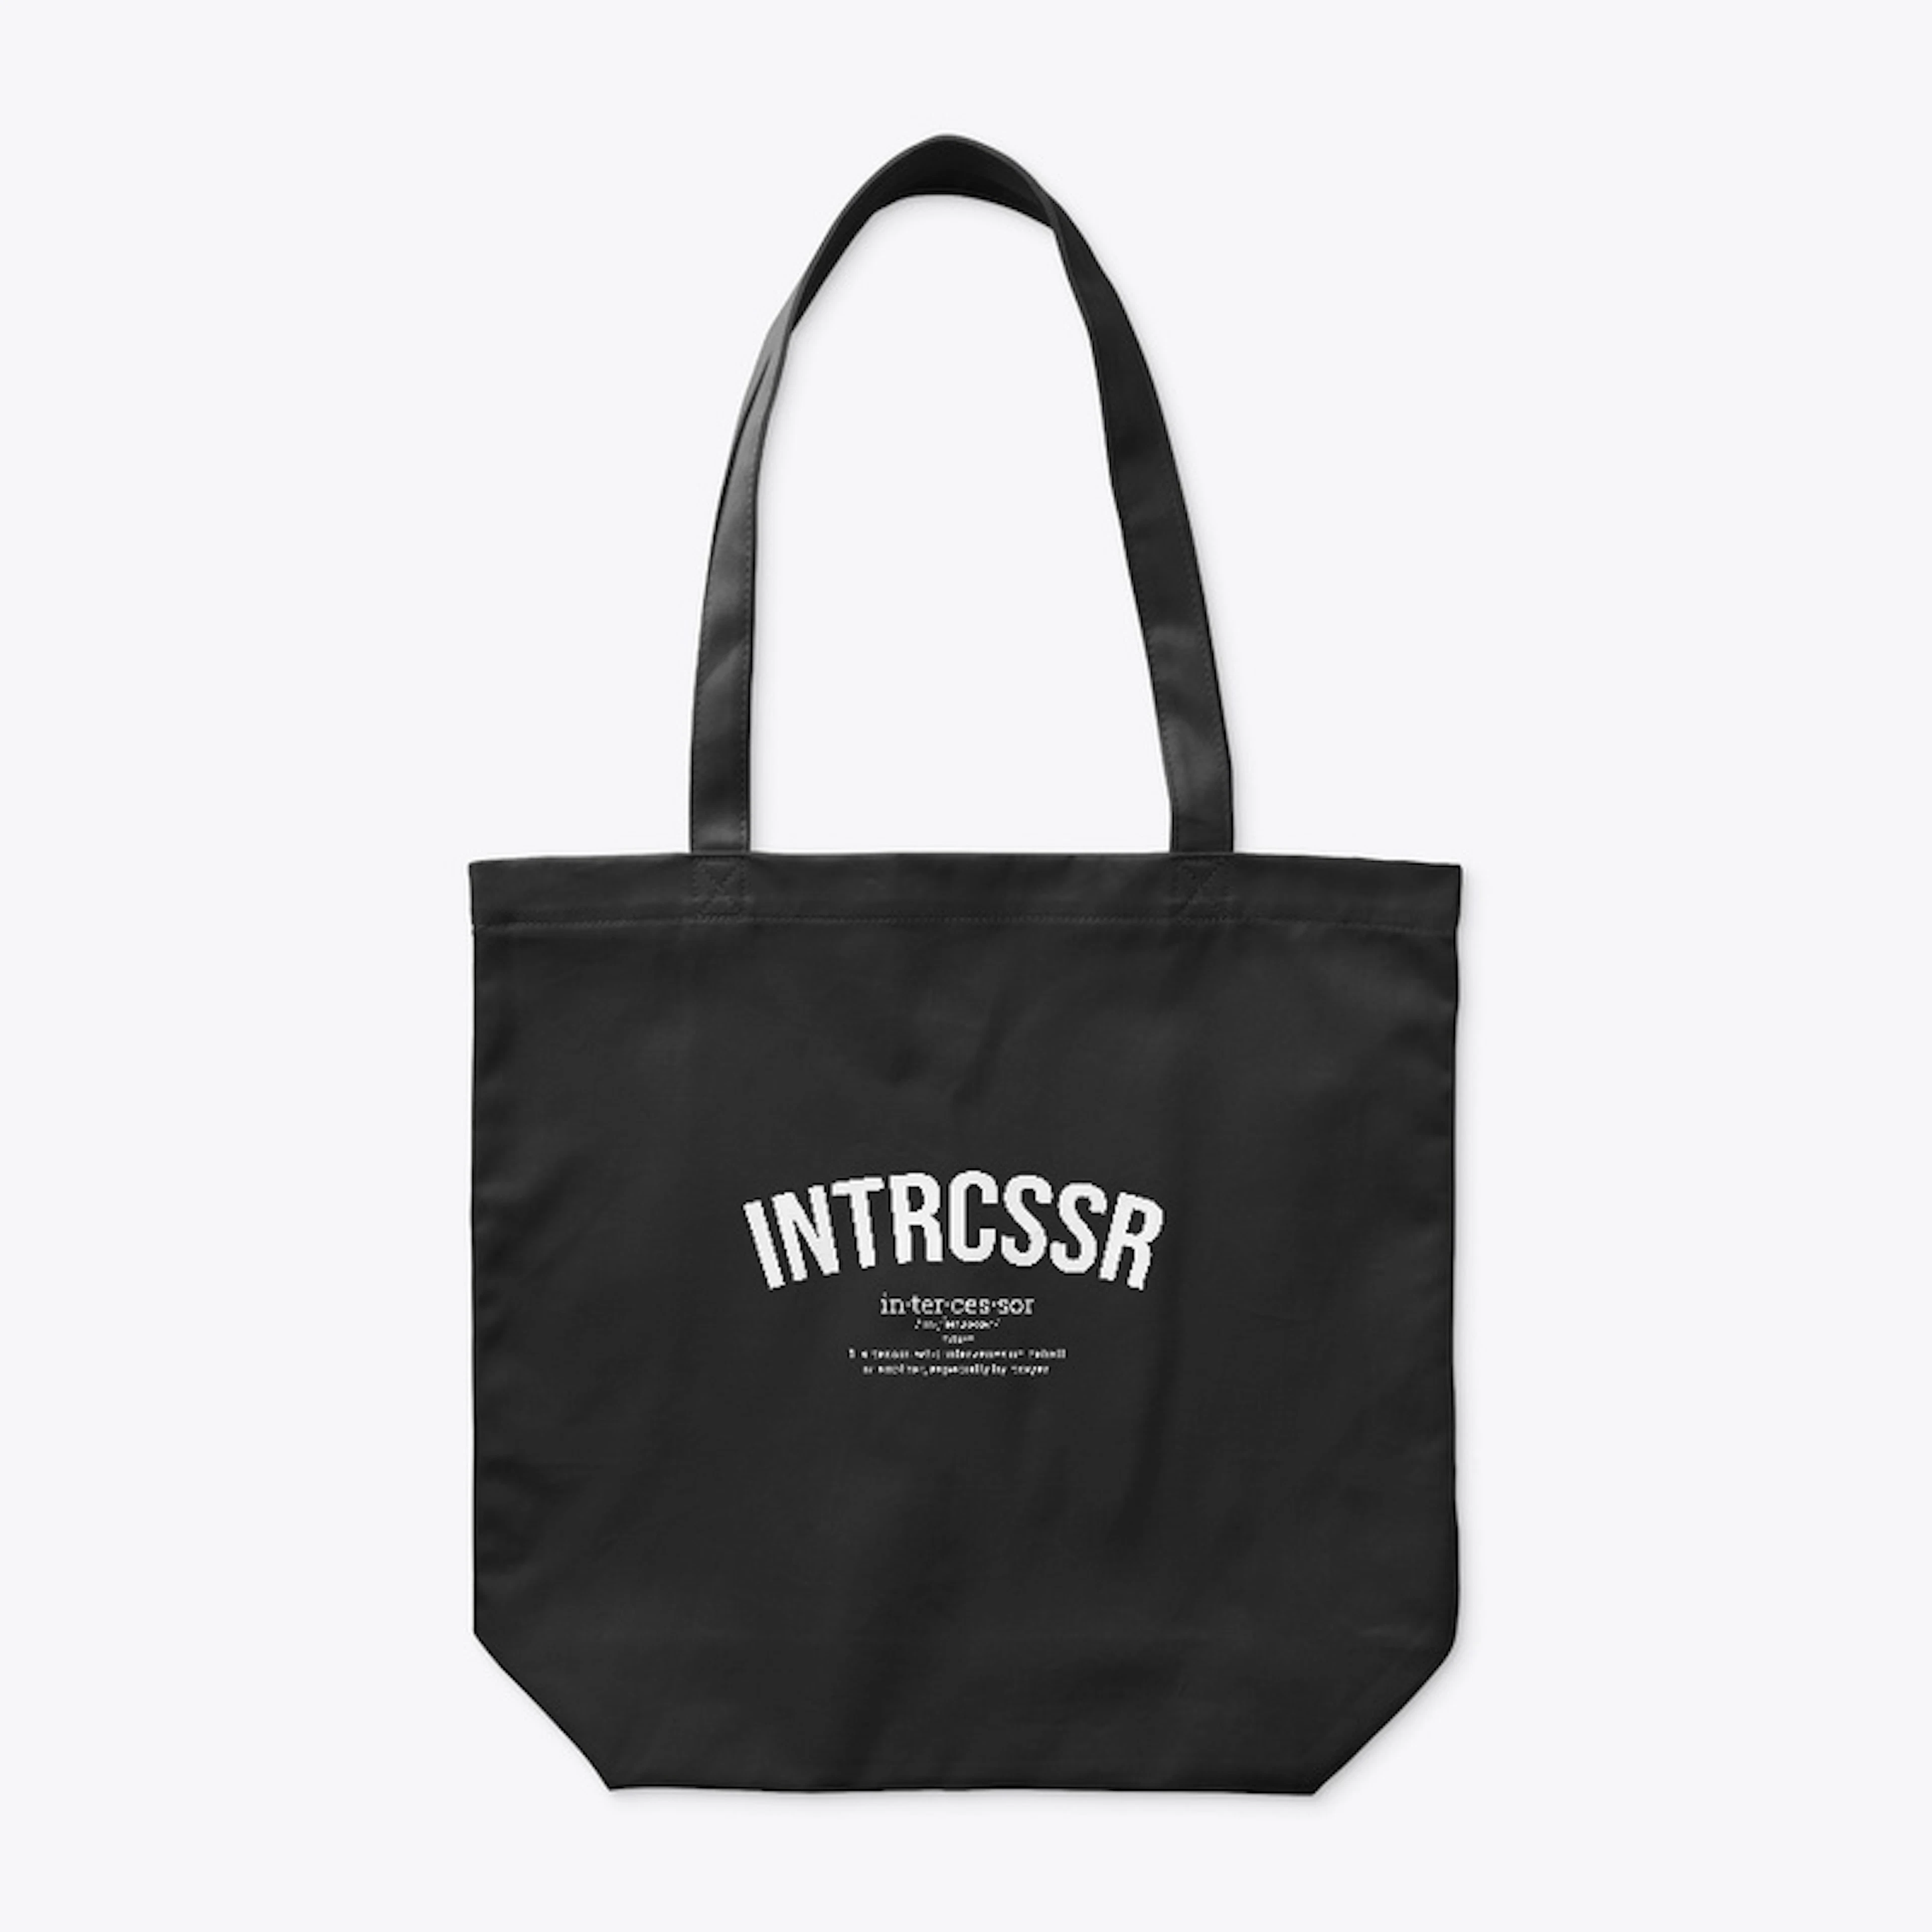 INTRCSSR (Definition Collection)